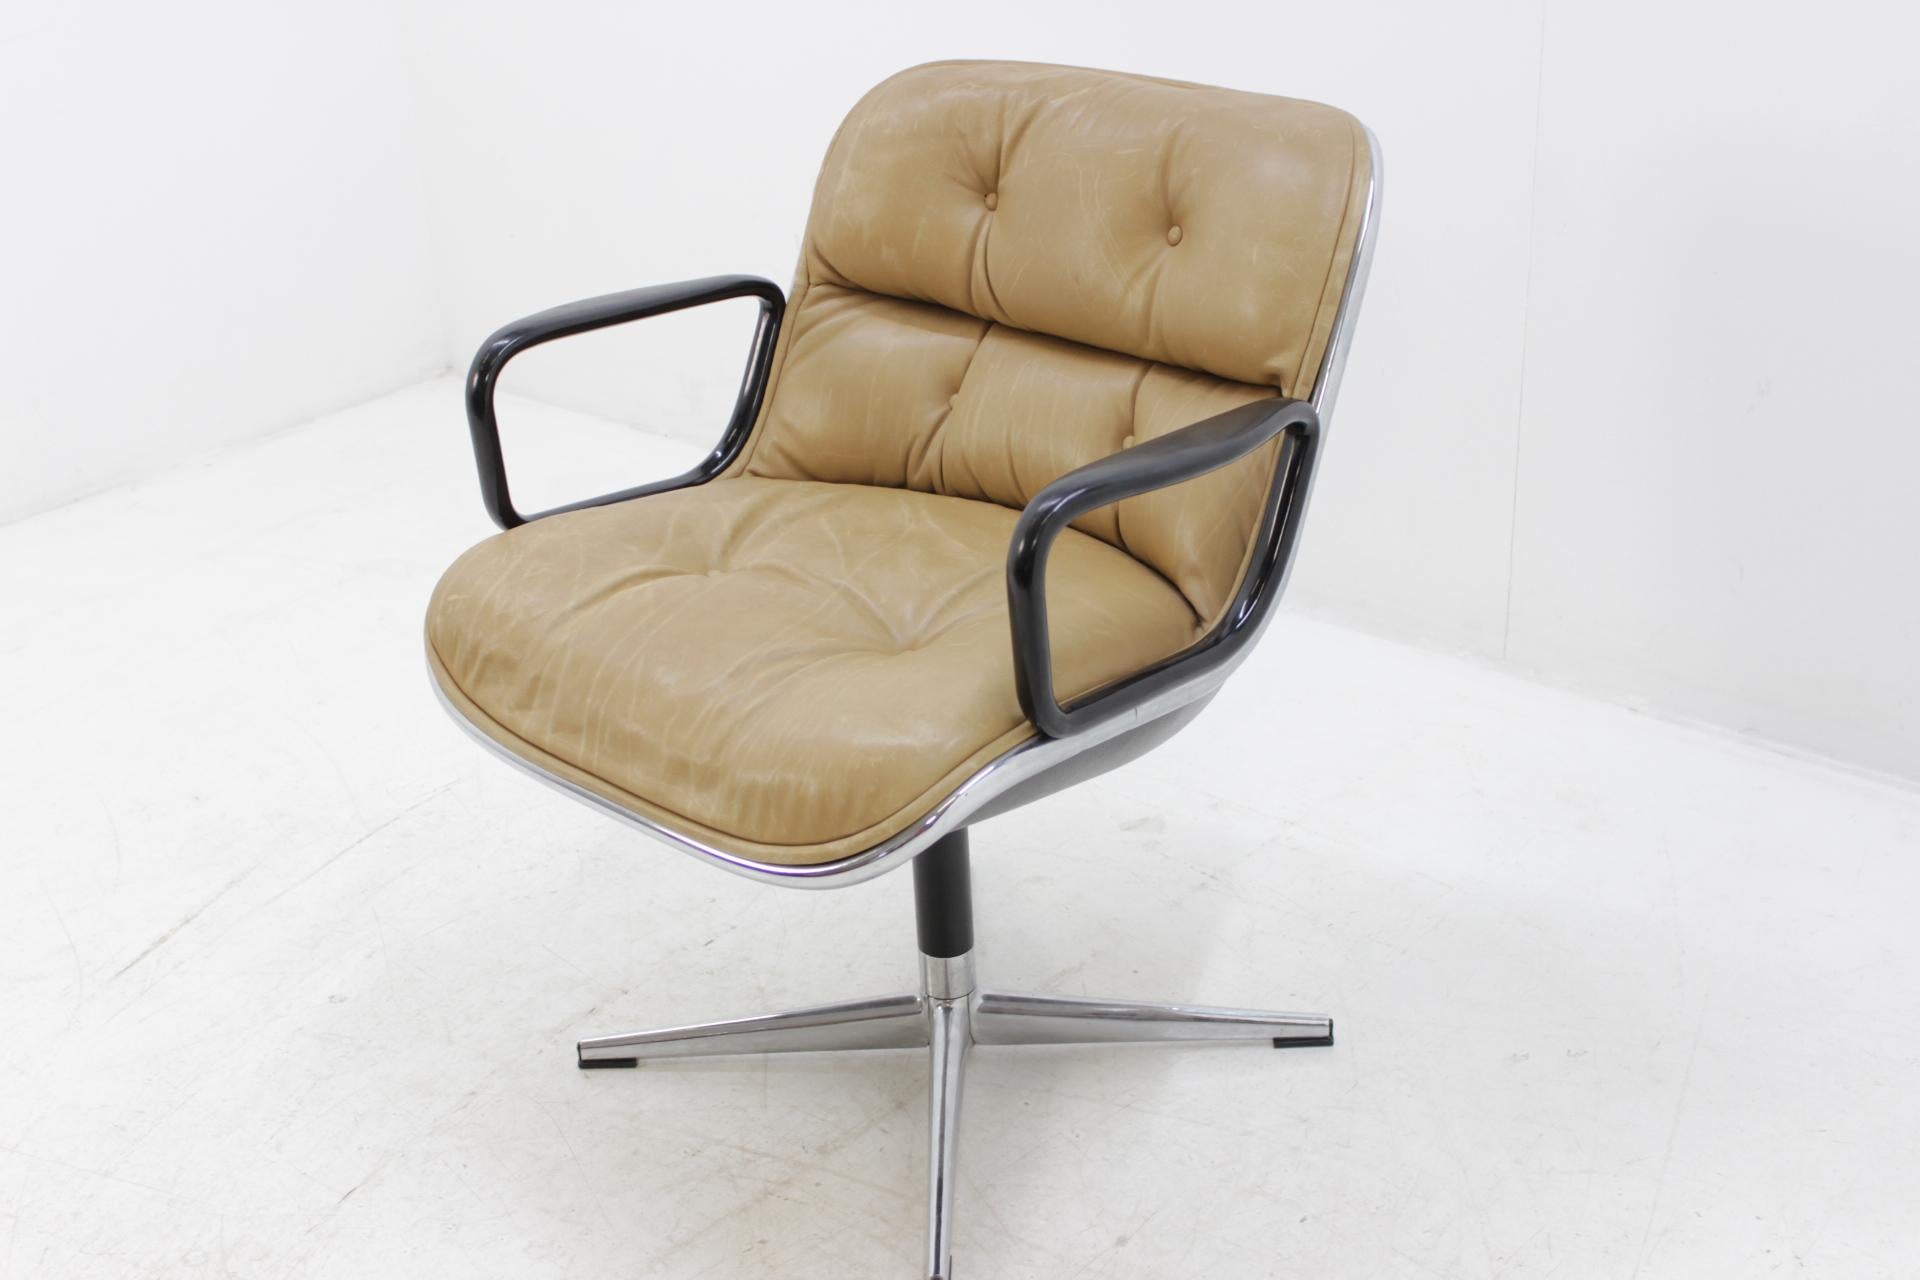 Metal Midcentury Leather Swivel Chair Designed by Charles Pollock, 1970s